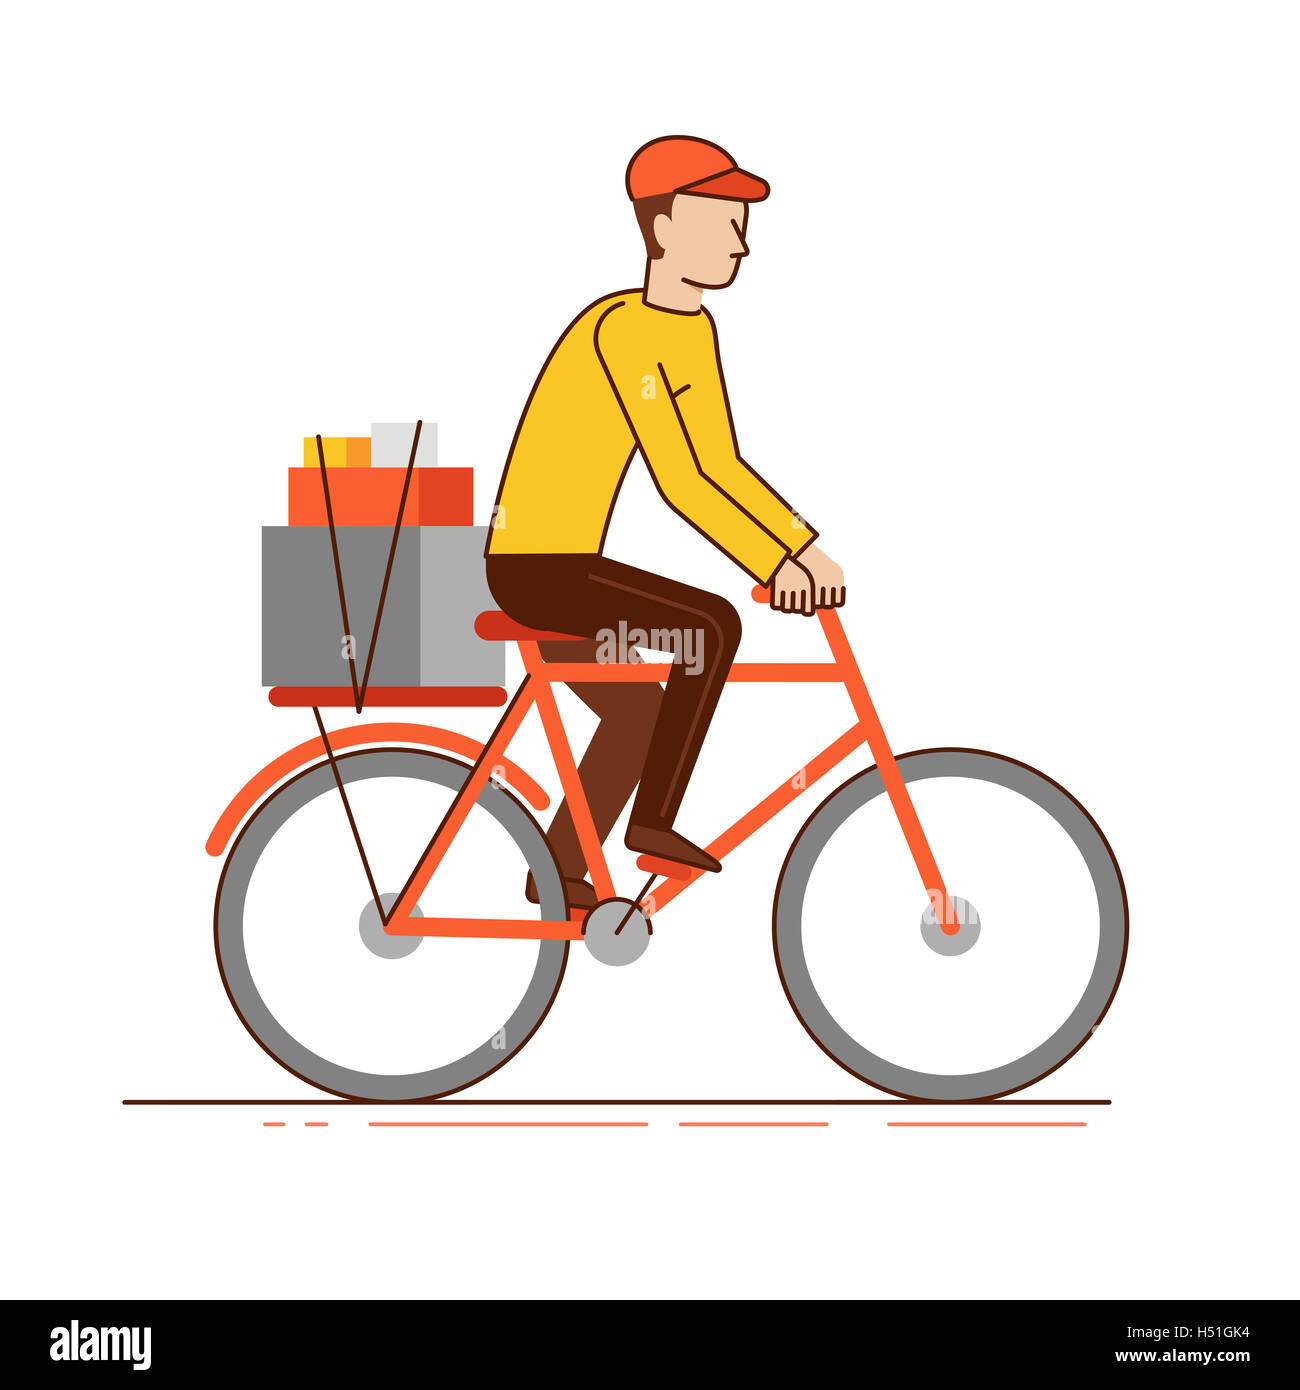 Illustration in modern flat linear style - man courier riding bicycle with boxes - delivery business concept Stock Photo